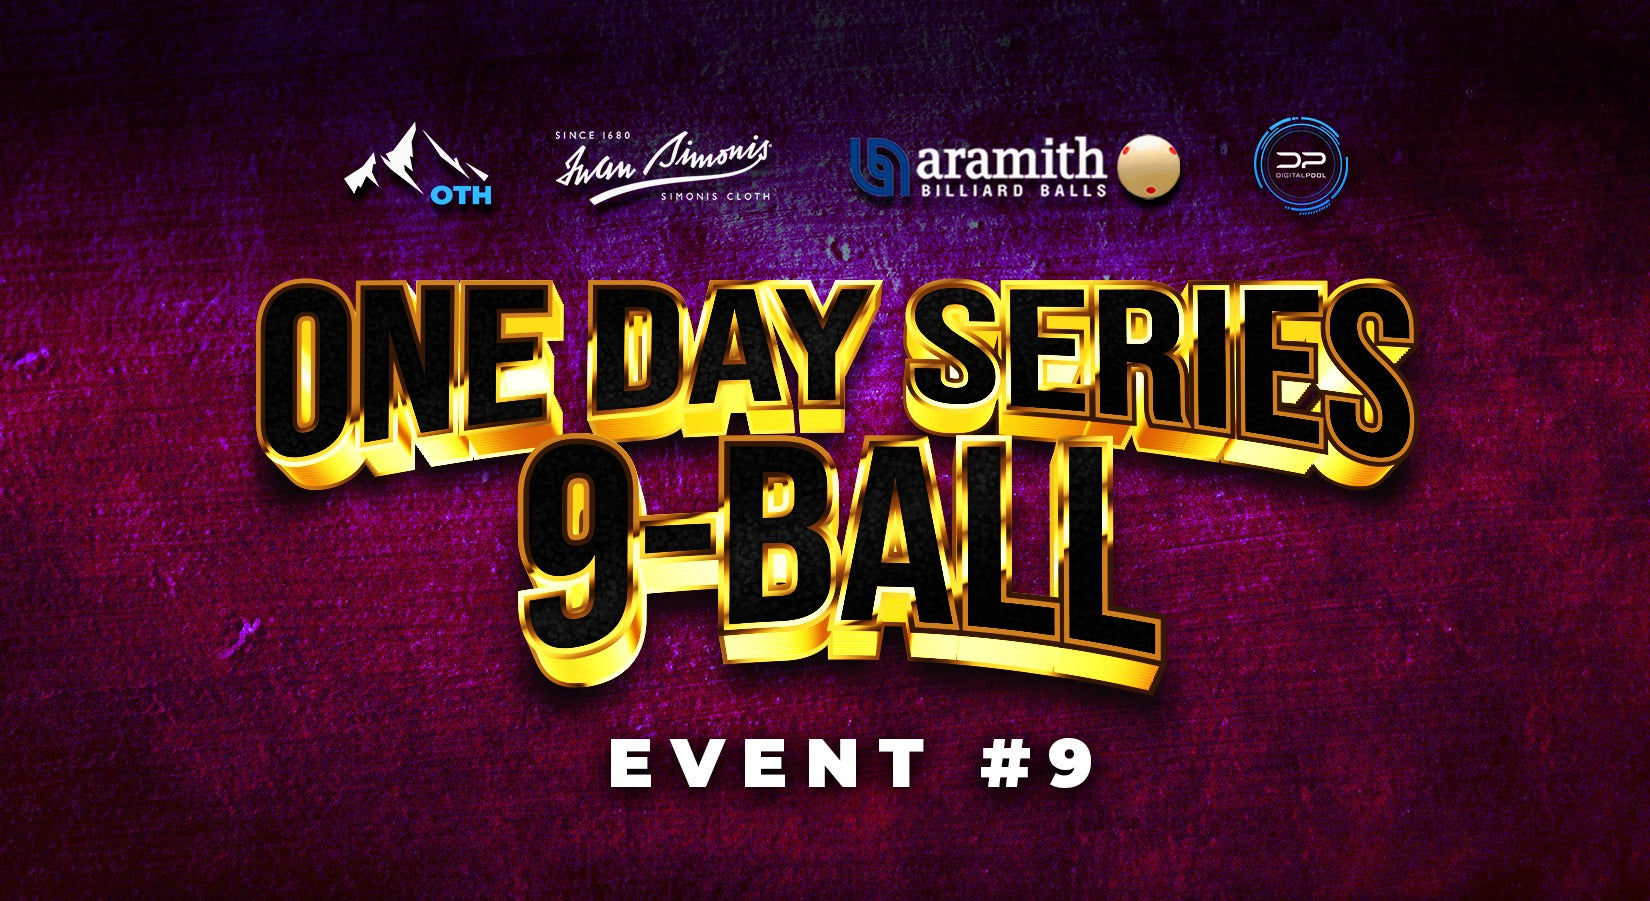 Nov 9 - One Day Open 9-Ball Series Event #9